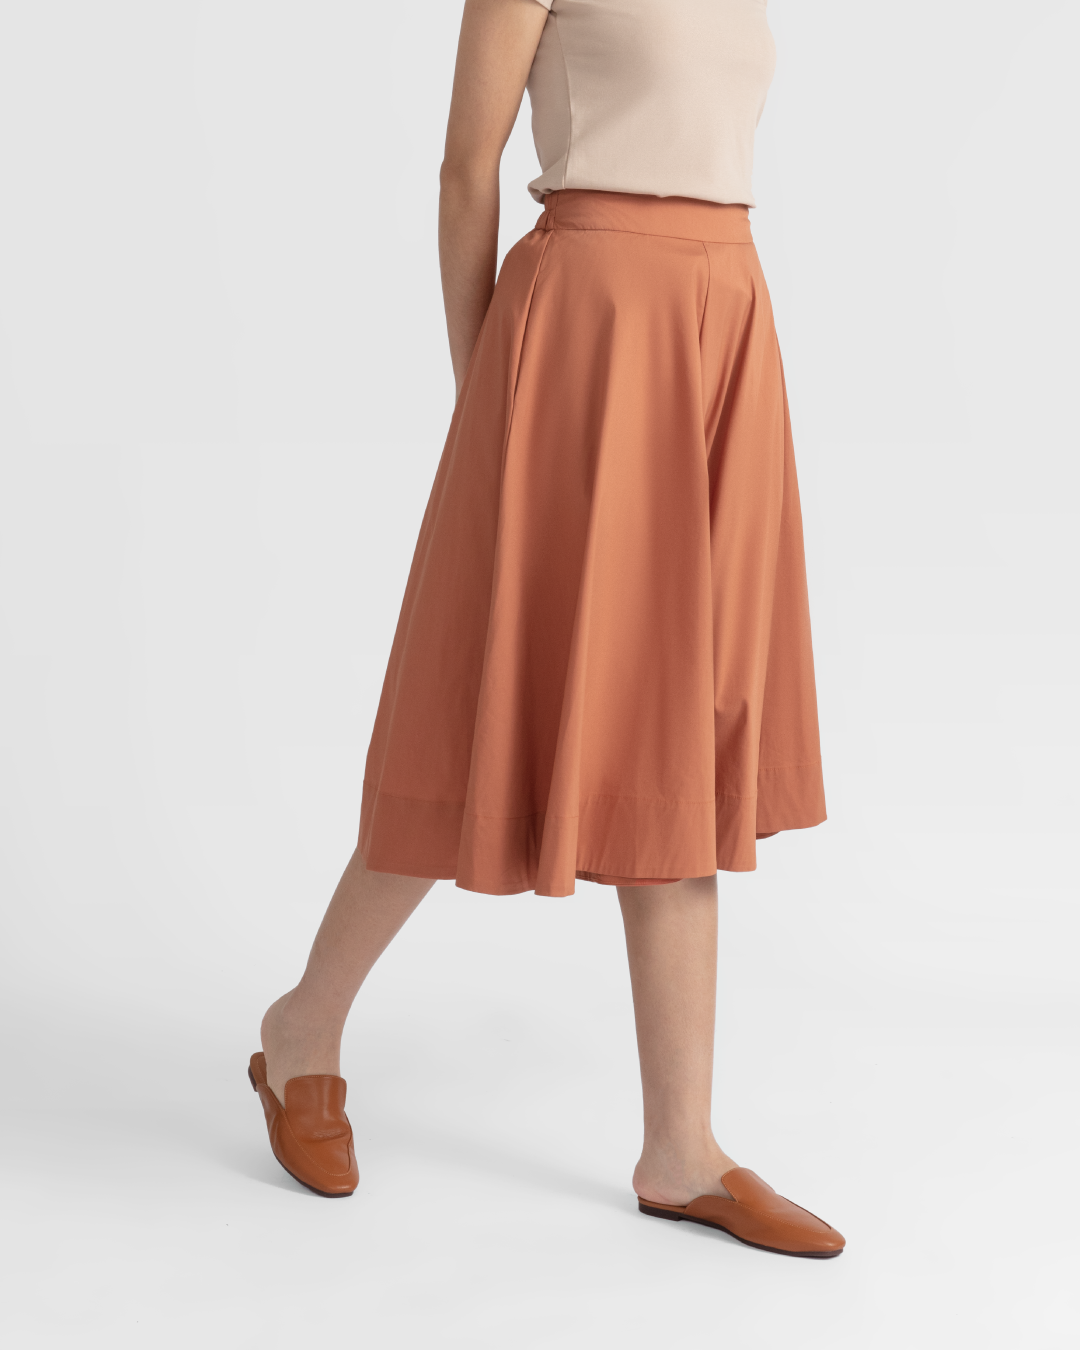 Culottes Trousers - Buy Culottes Trousers online in India